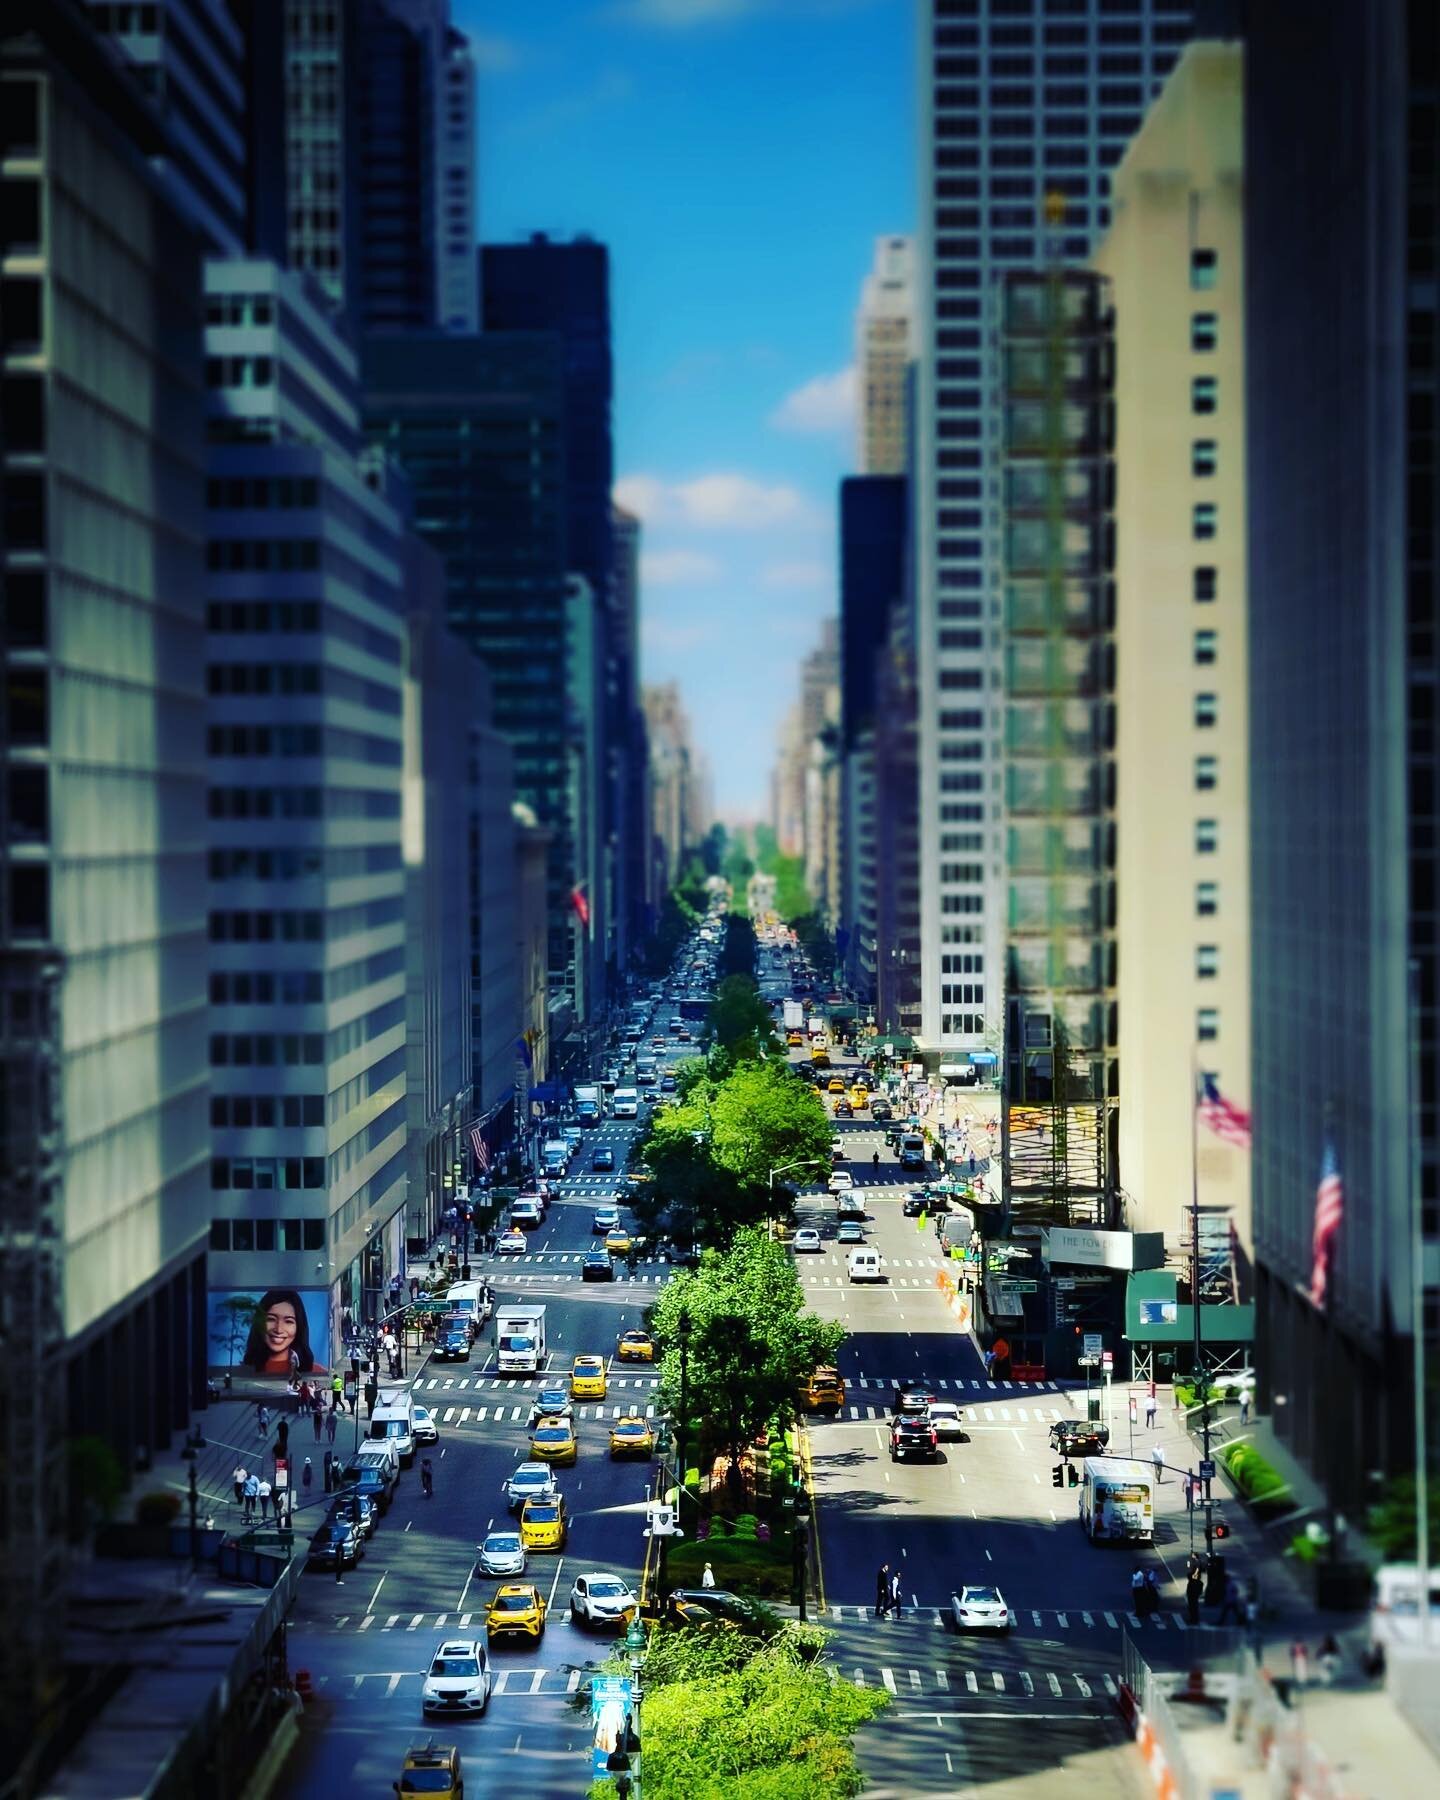 From my &ldquo;From Above&rdquo; Series: Park Avenue from the Helmsley Building

#midtown #manhattan #hemsleybuilding #parkavenue #newyork
#streets_storytelling #lensculture #lensculturestreets #ig_streetphotography #timeless_streets #thestreetphotog